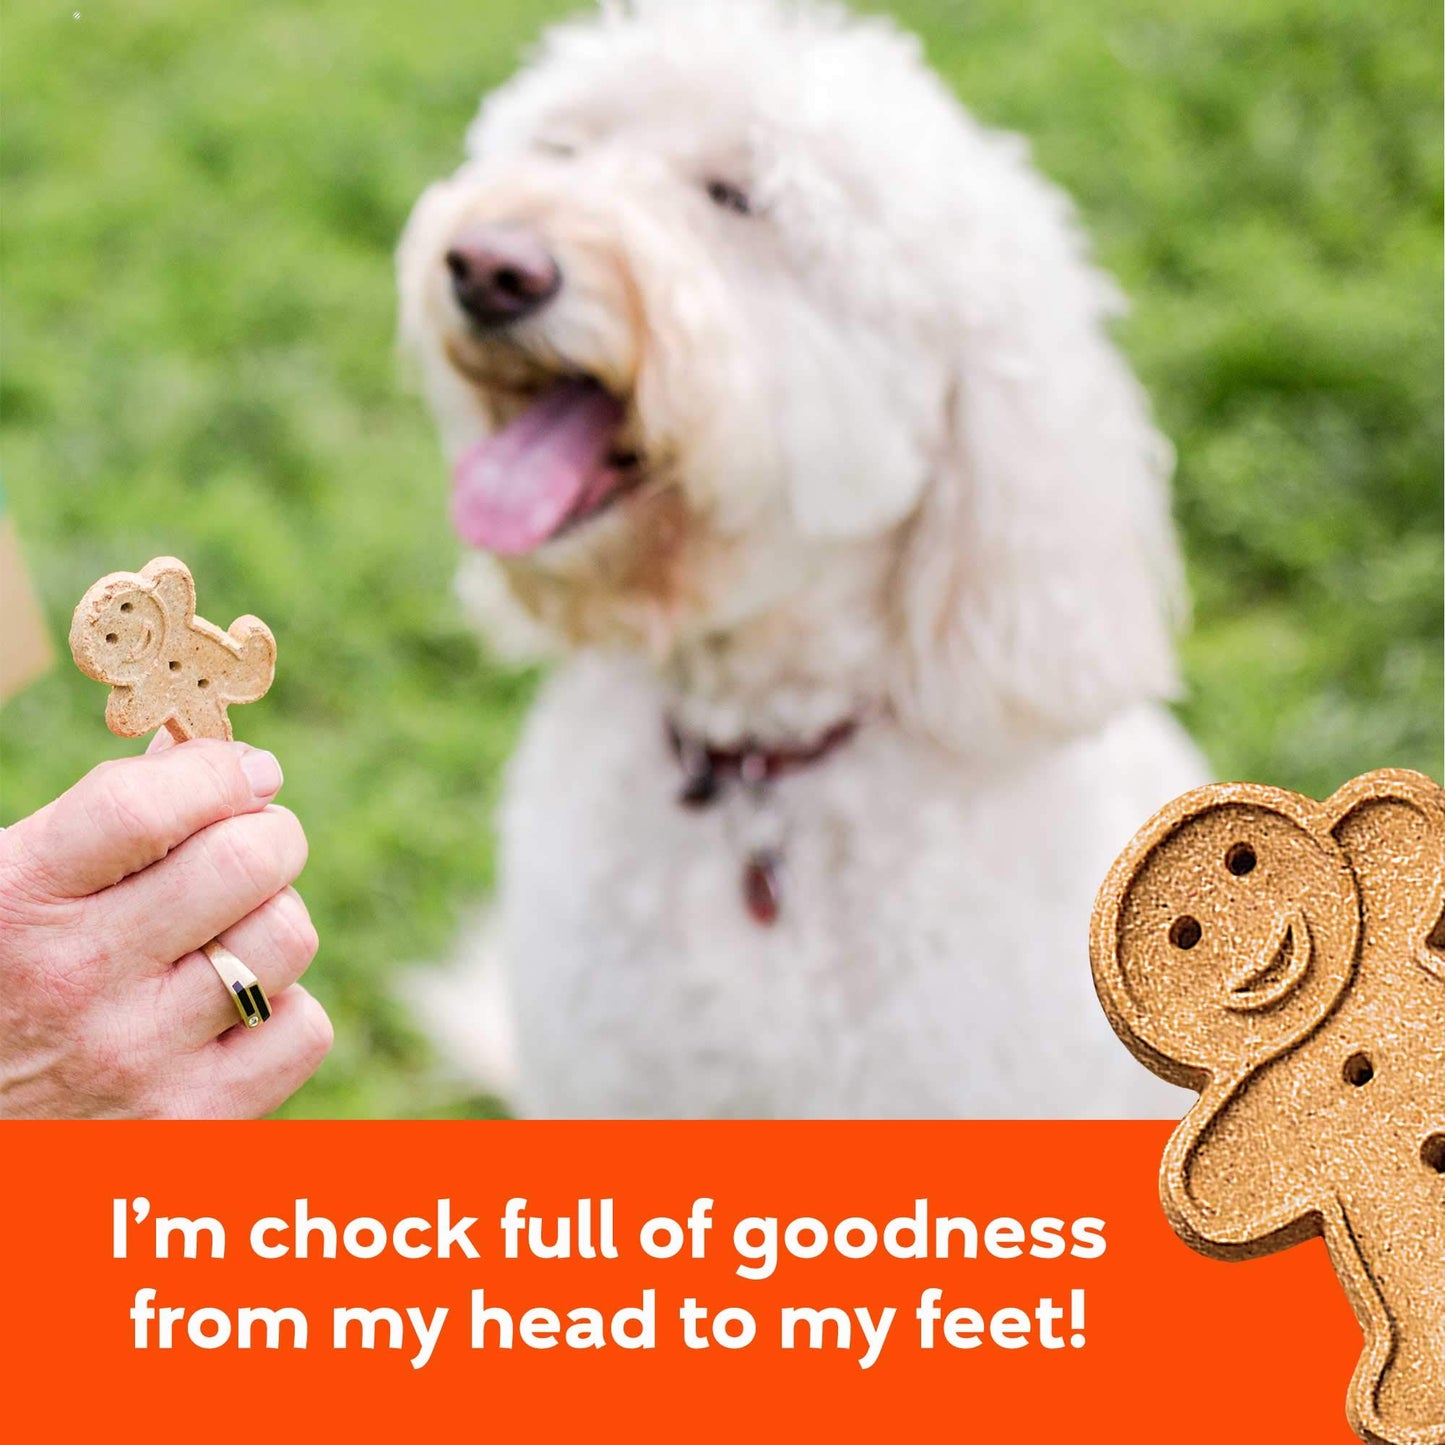 Buddy Biscuits Oven-Baked, Healthy Whole-Grain, Crunchy Treats for Dogs